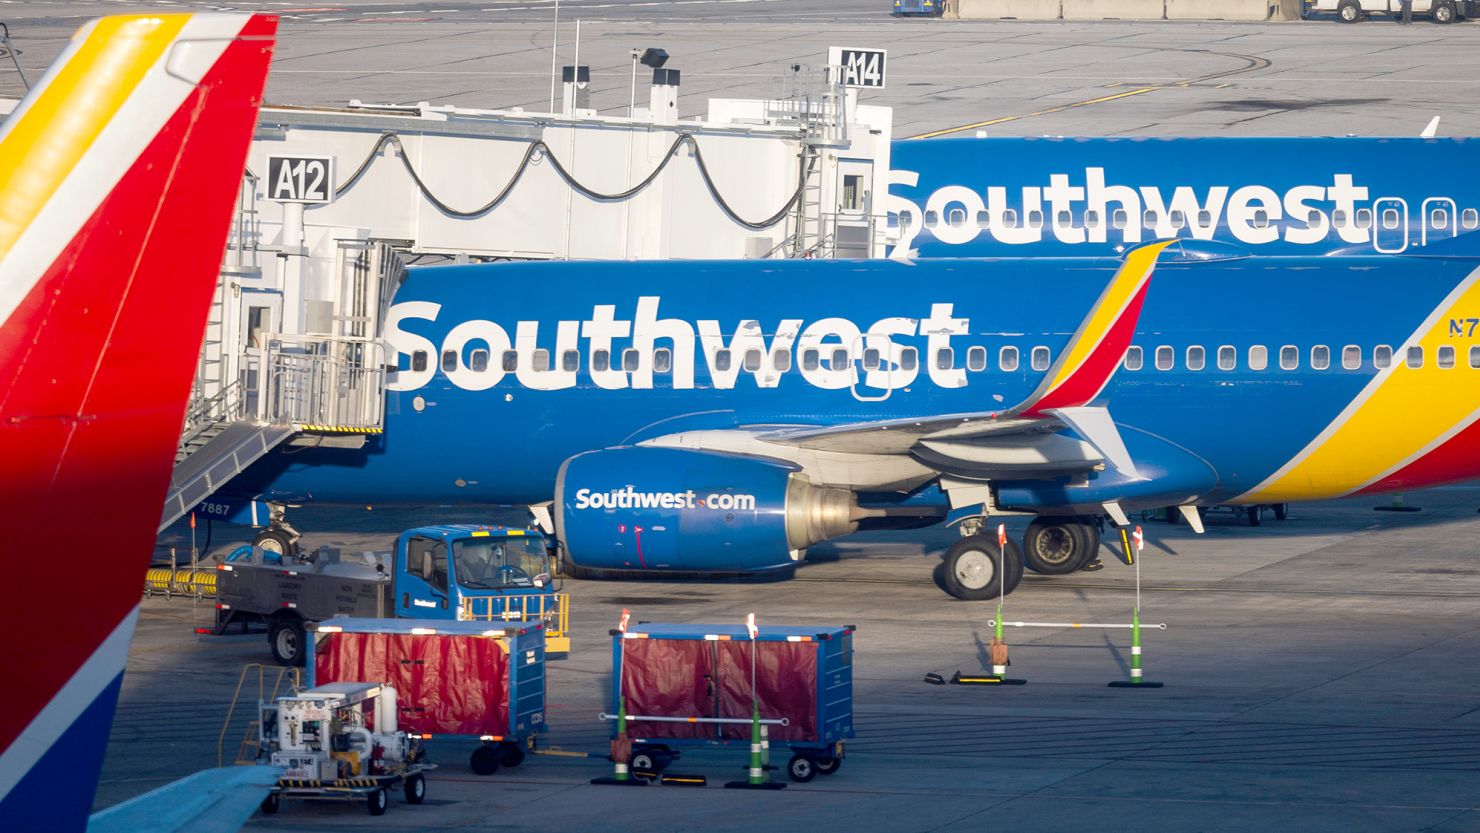 Southwest Airlines planes at Baltimore Washington International Airport (BWI) on December 28, 2022. (Jim Lo Scalzo/EPA-EFE/Shutterstock)